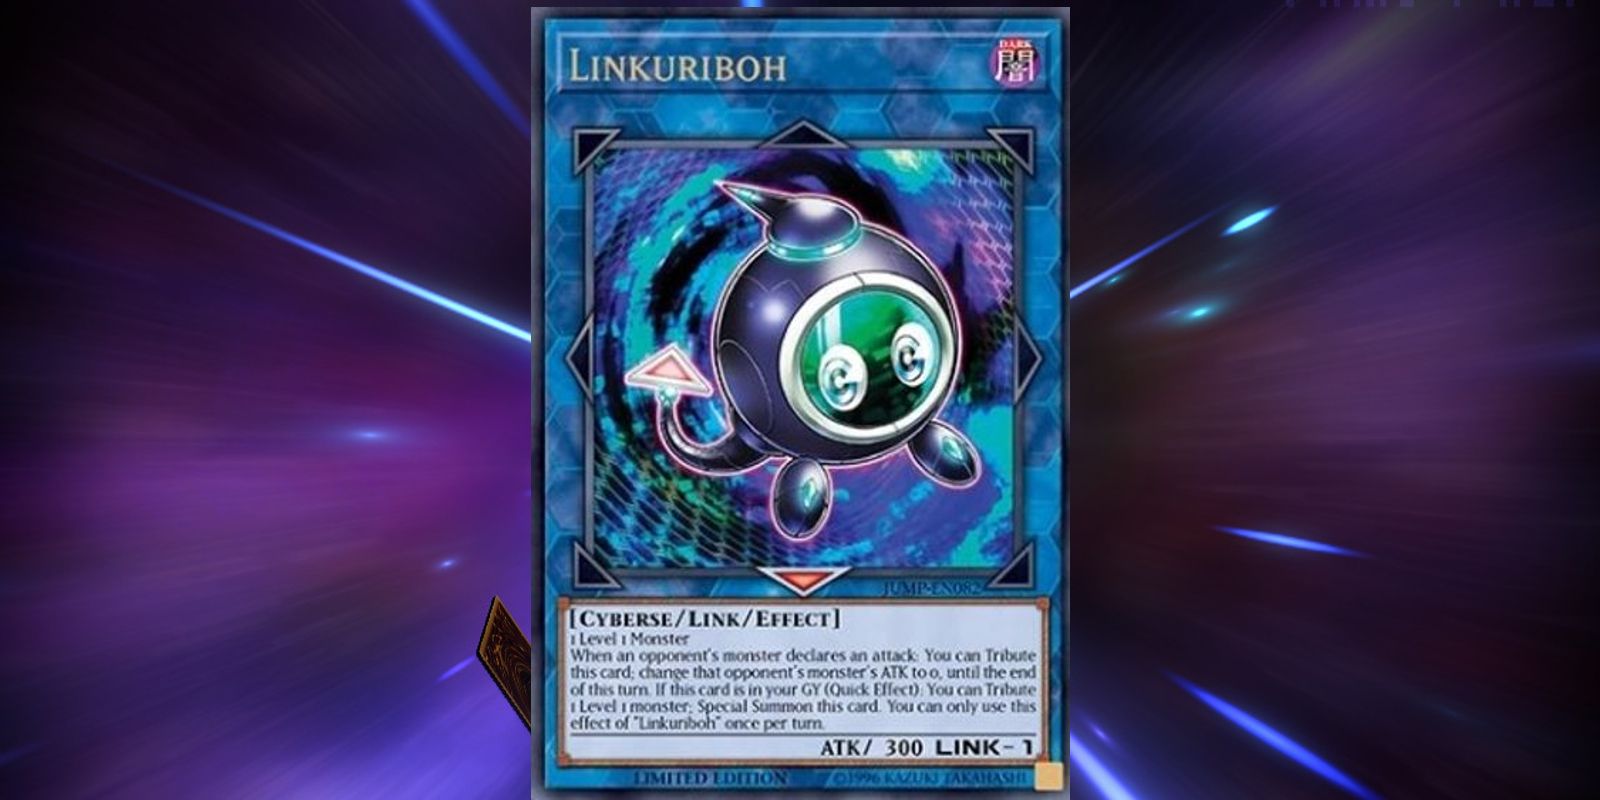 Linkuriboh can be summoned in Yu-Gi-Oh! Master Duel.